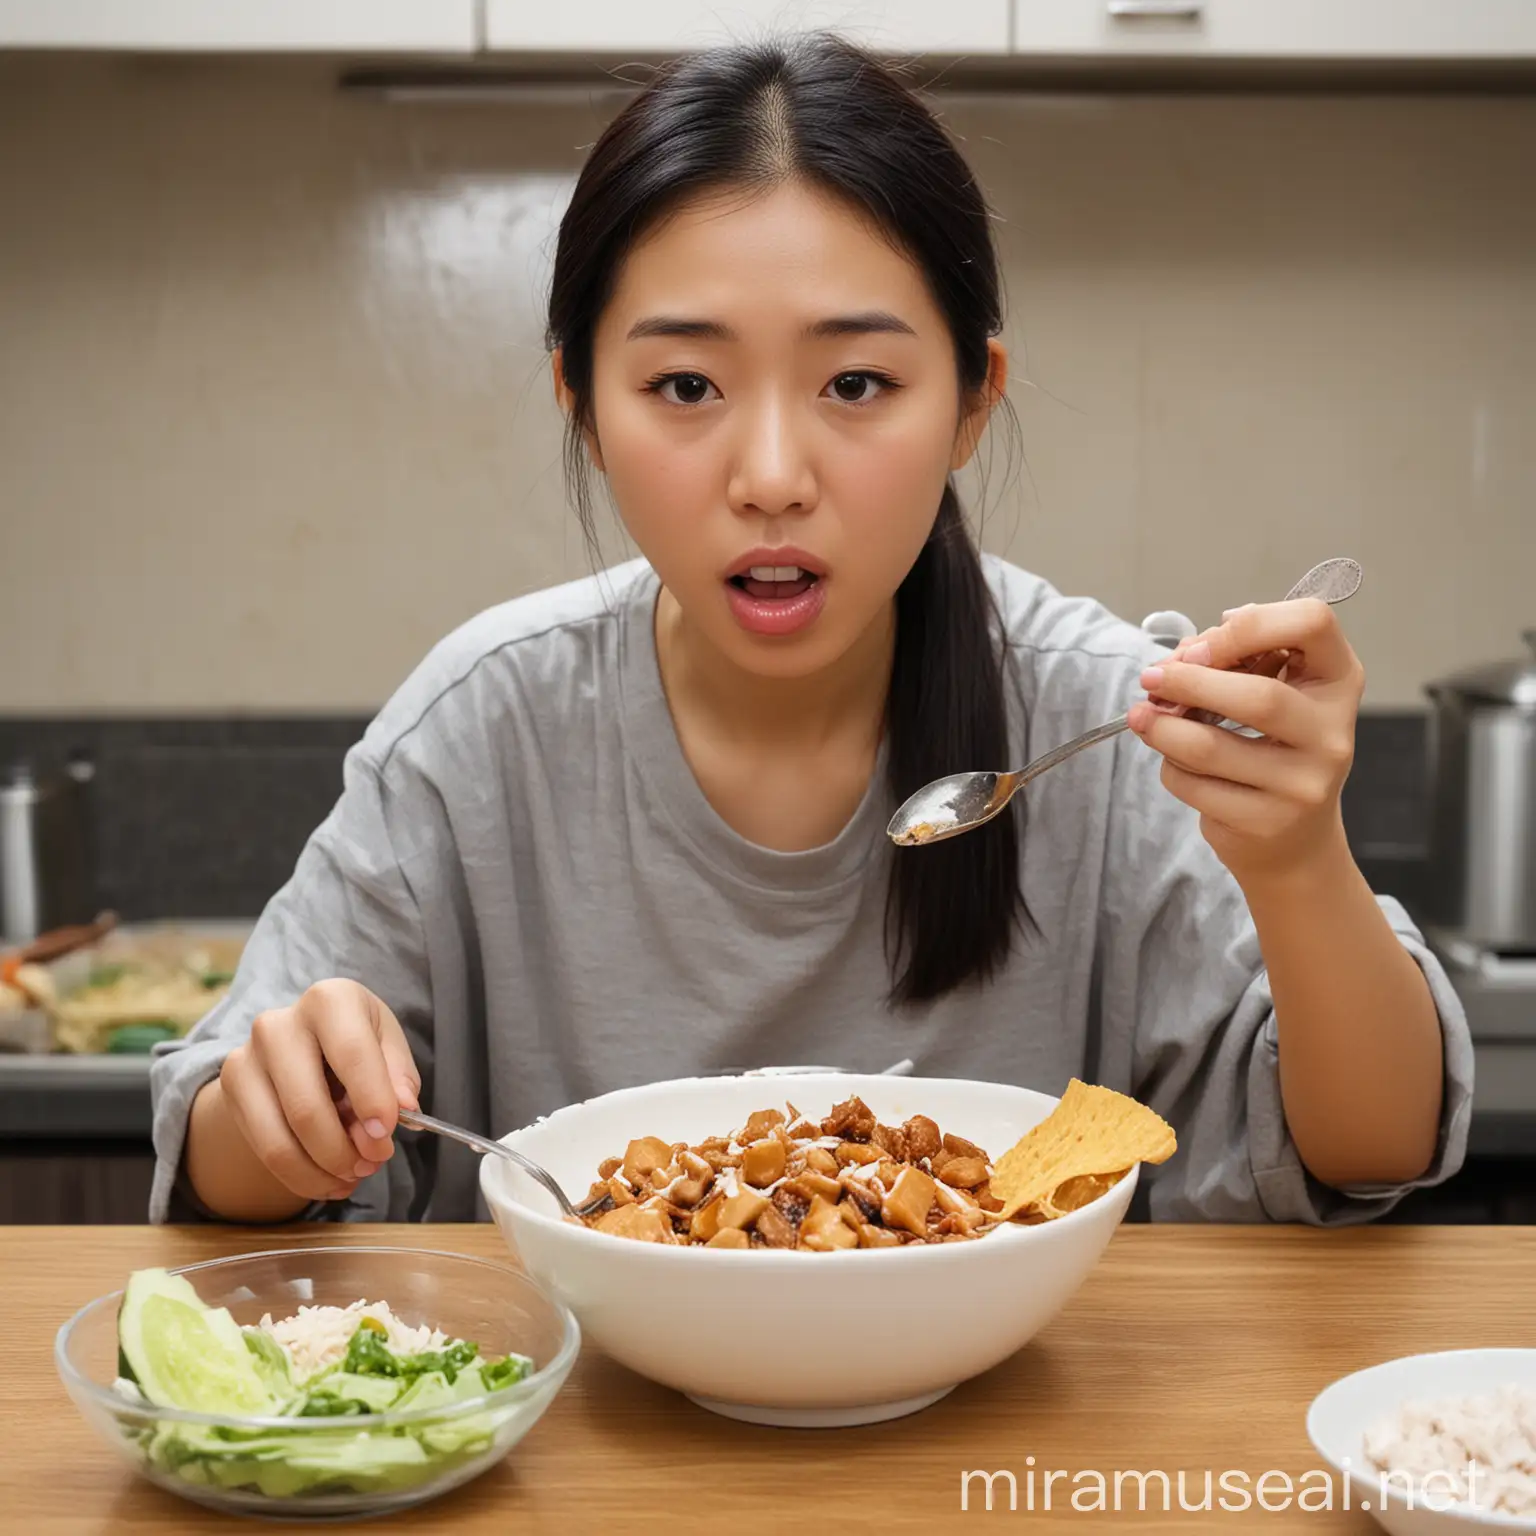 asian holding spoon and eating bad taste food, salty food on bowl,  in the kitchen